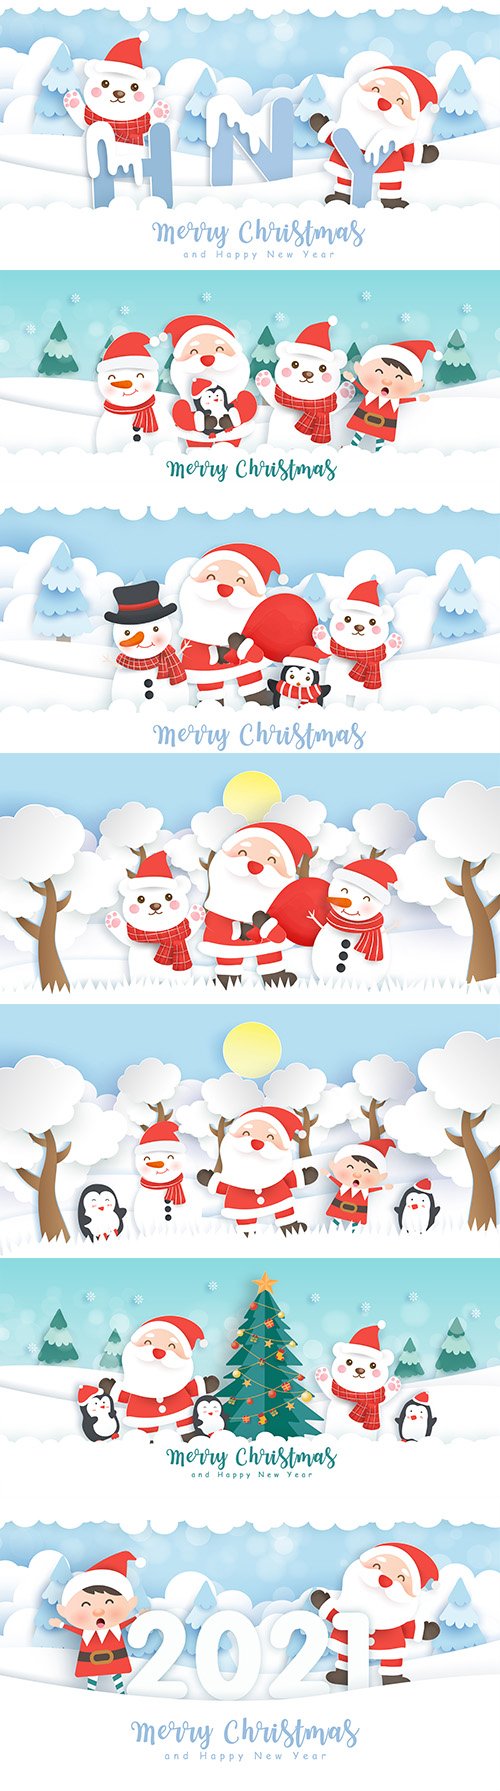 Christmas and New Year's Eve banner with Santa Claus and friends